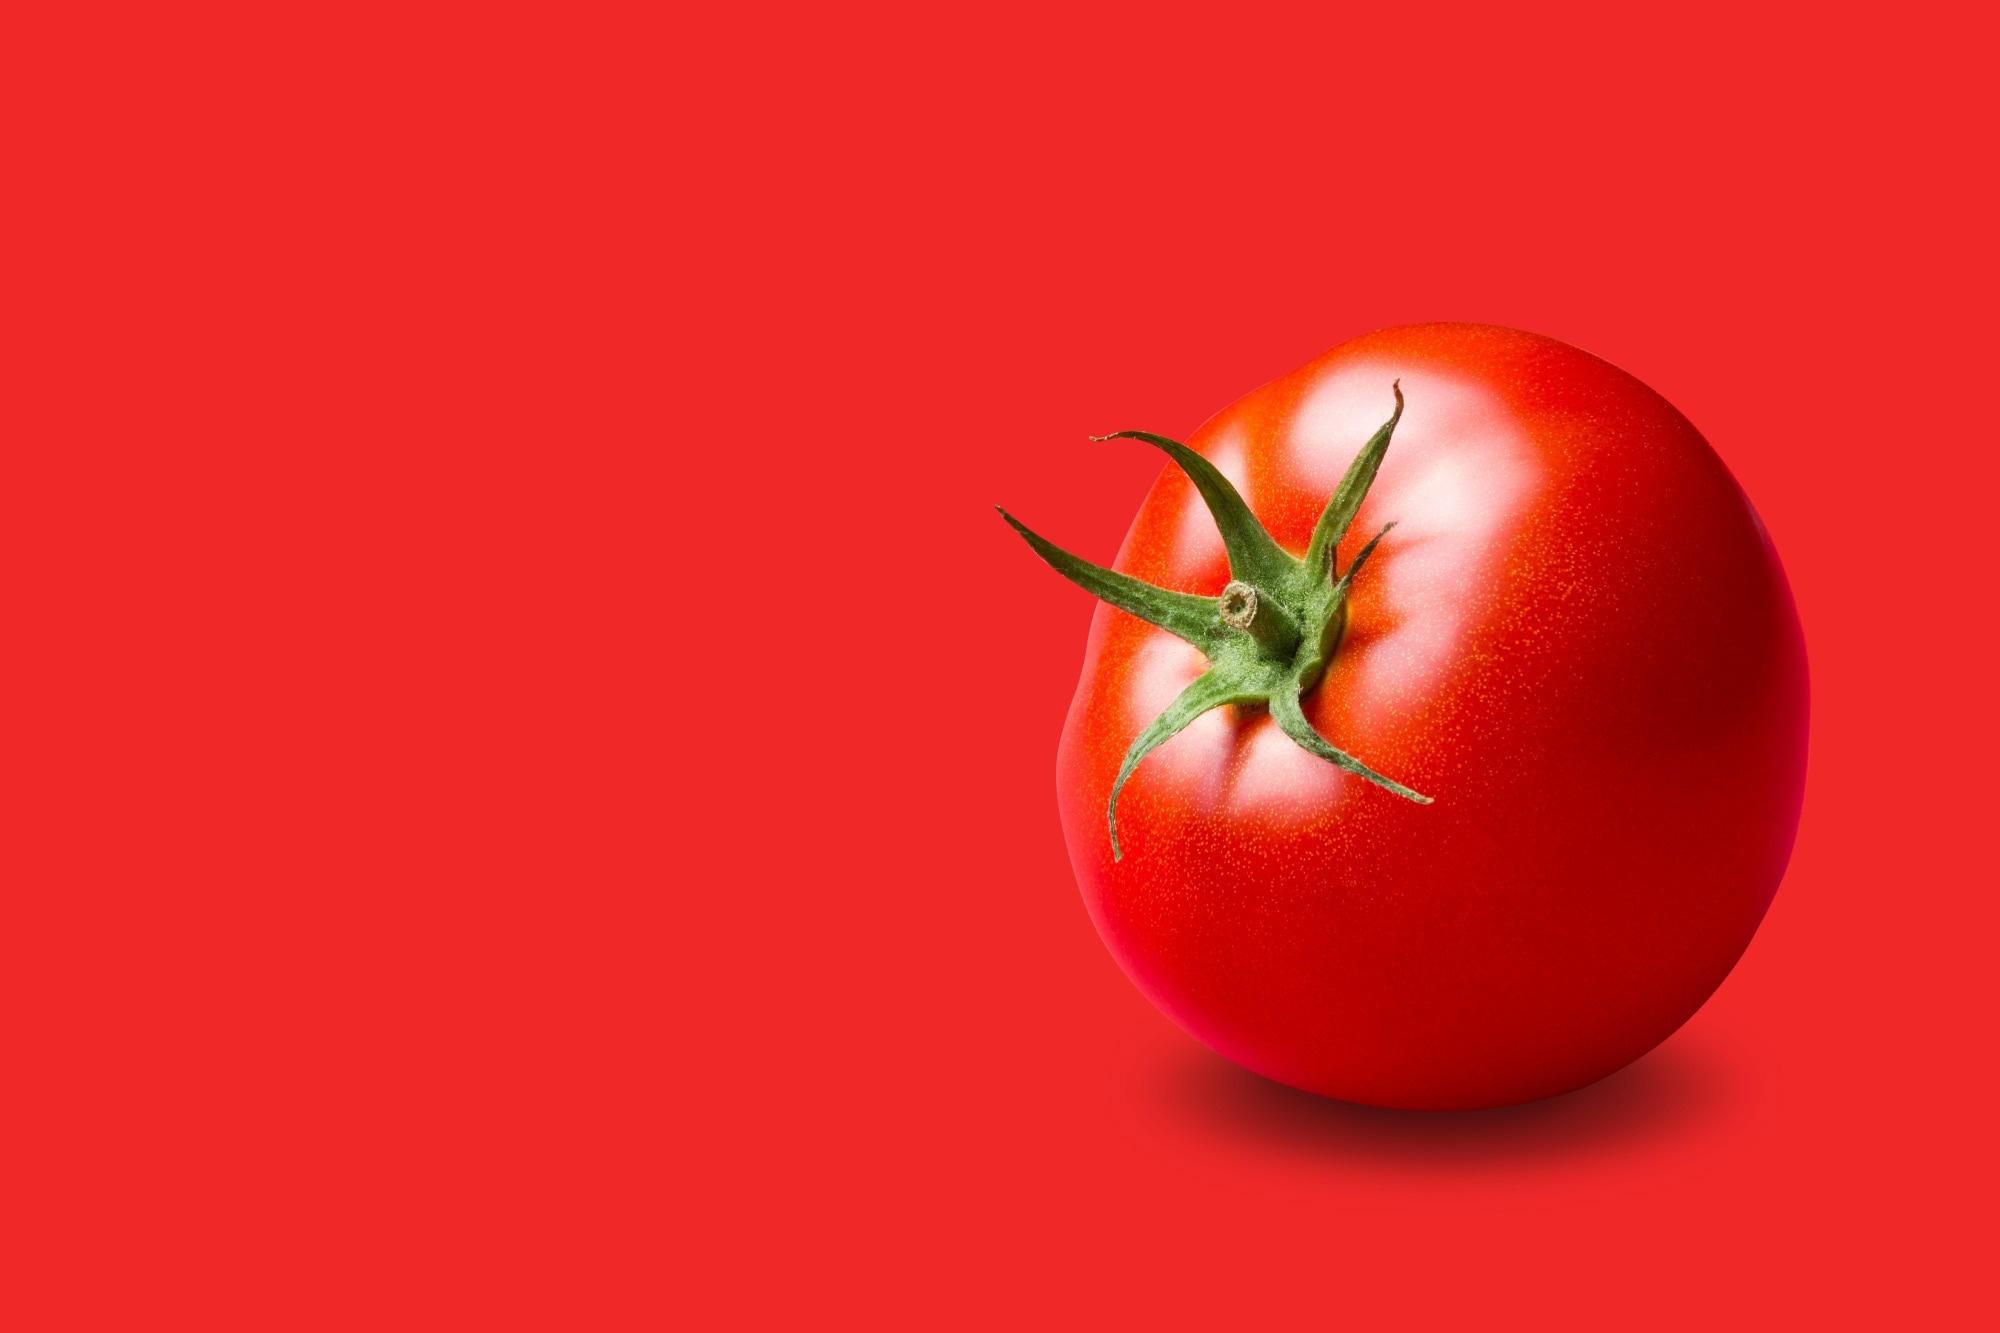 Study: Dually biofortified cisgenic tomatoes with increased flavonoids and branched-chain amino acids content. Image Credit: AnEduard / Shutterstock